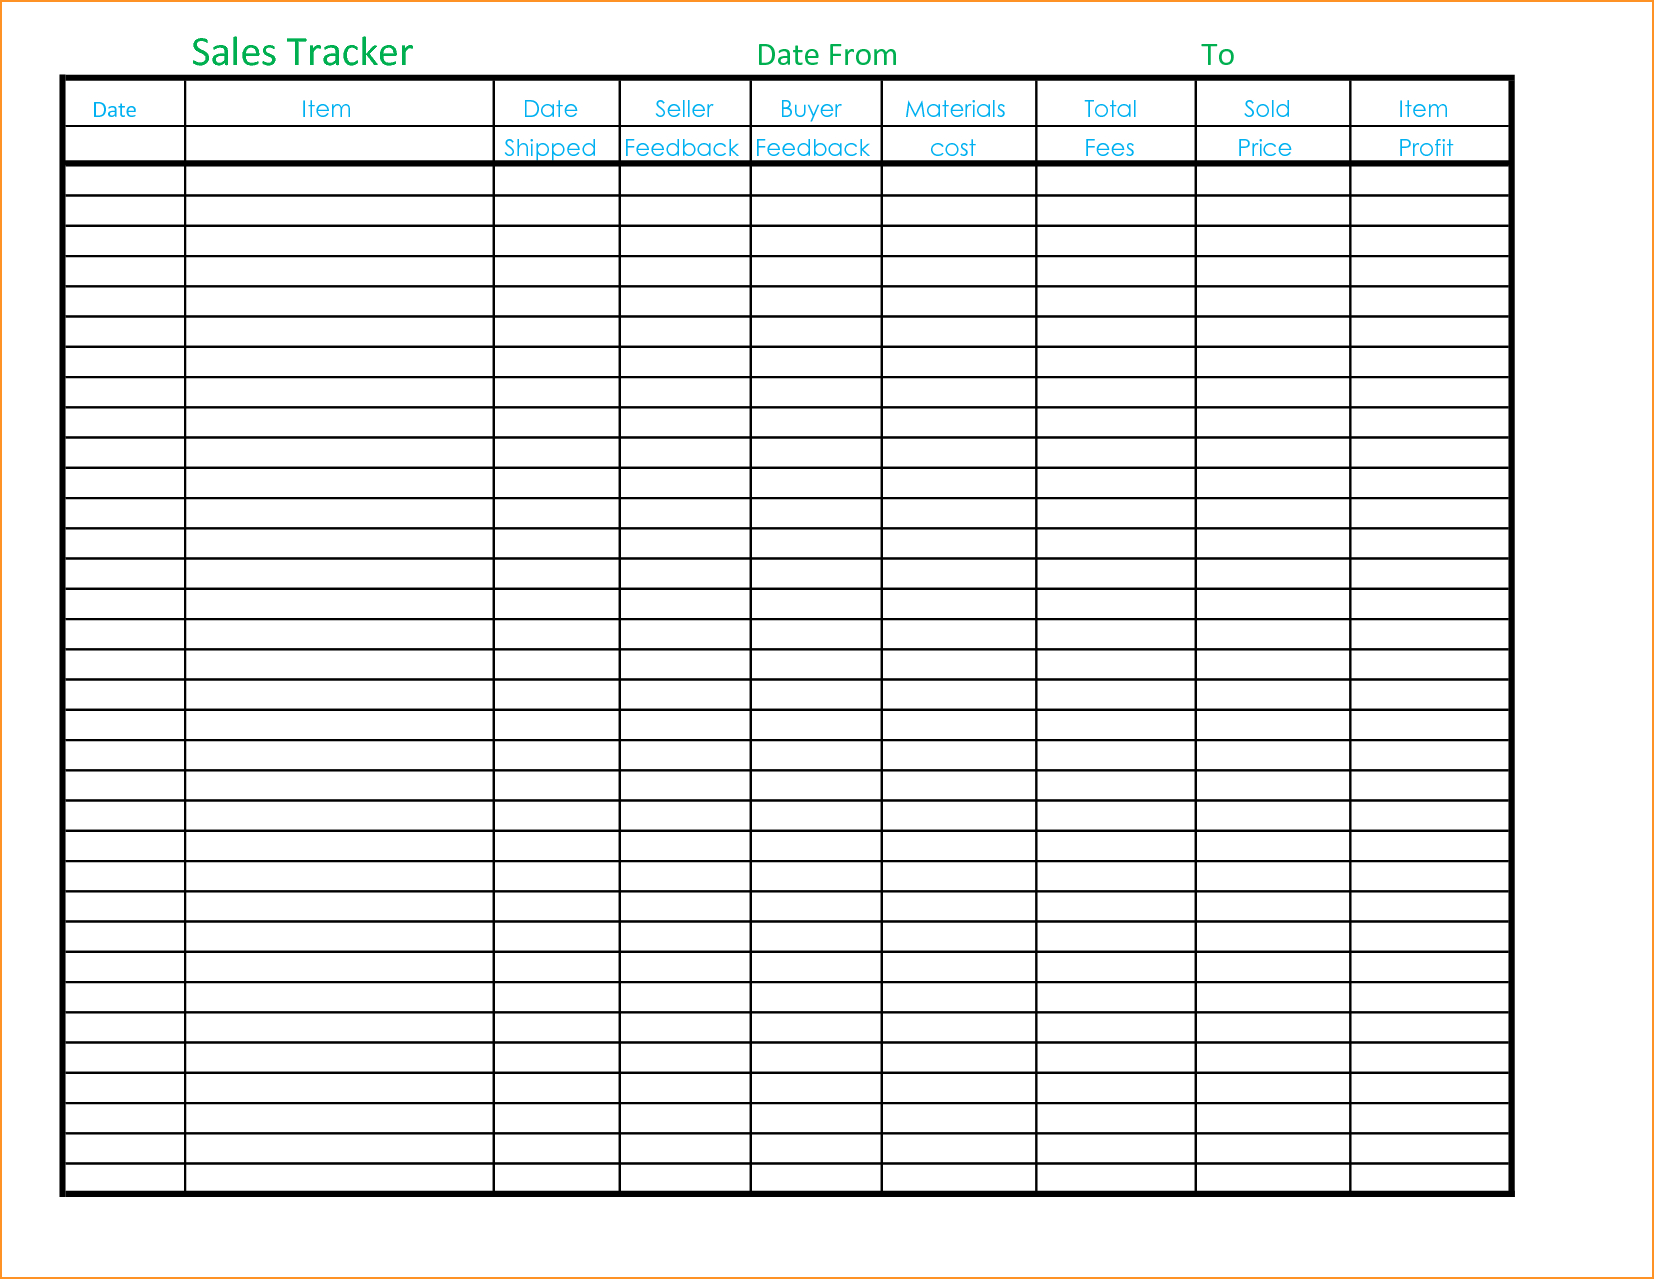 Free Excel Crm Template For Small Business | Homebiz4U2Profit Intended For Crm Excel Template Free Download